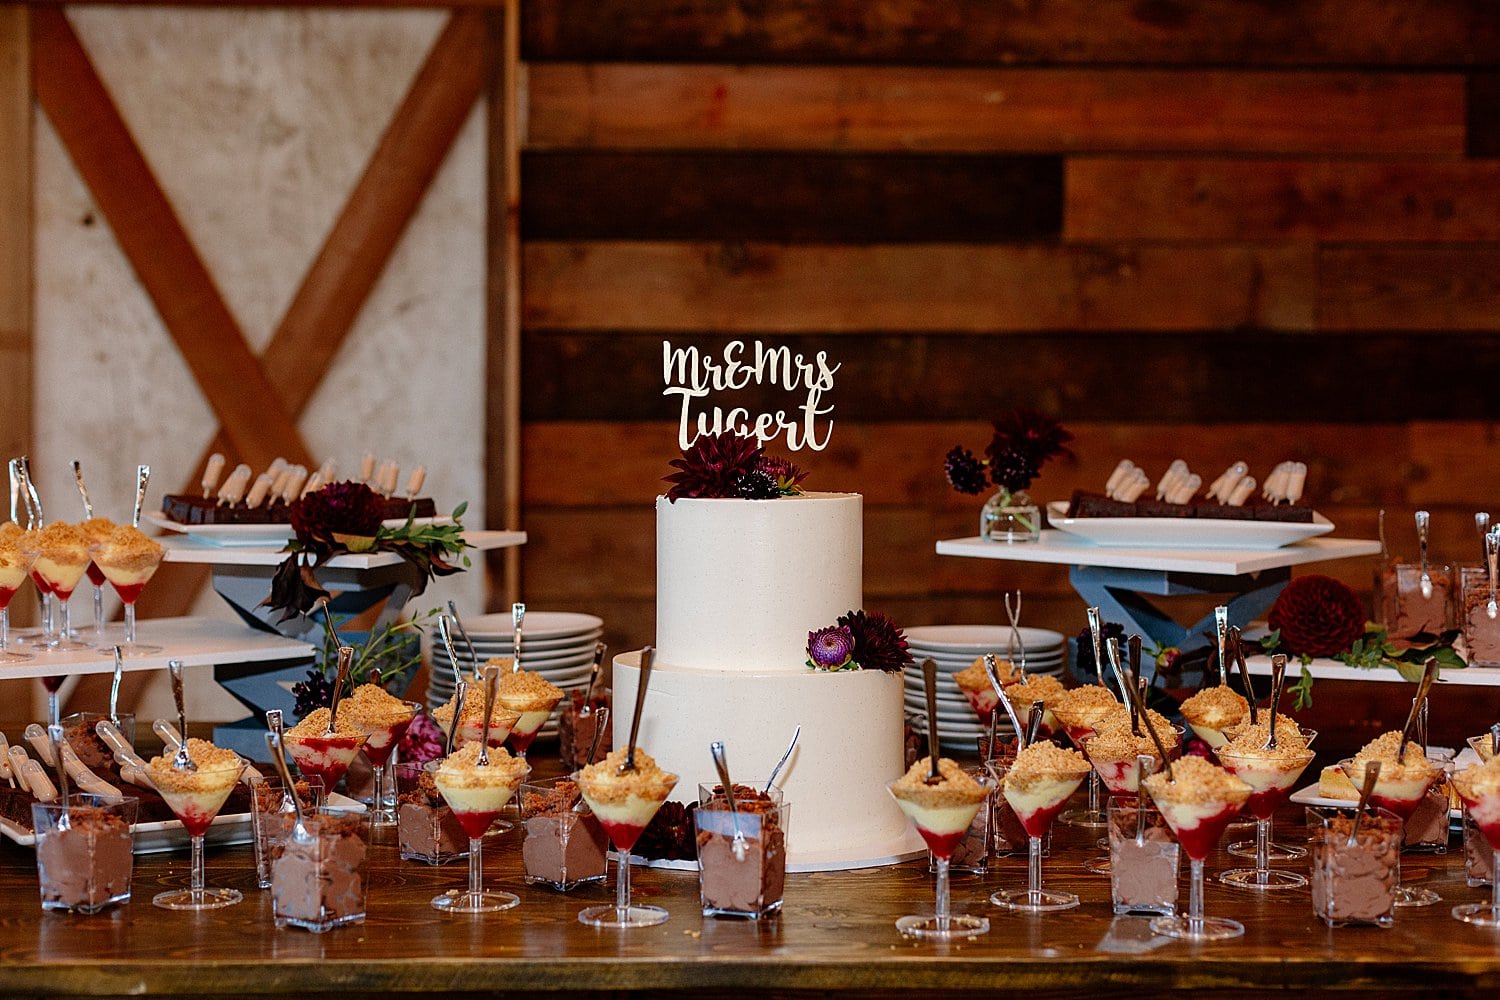 A wedding cake and dessert display at Abbey Road Farm.